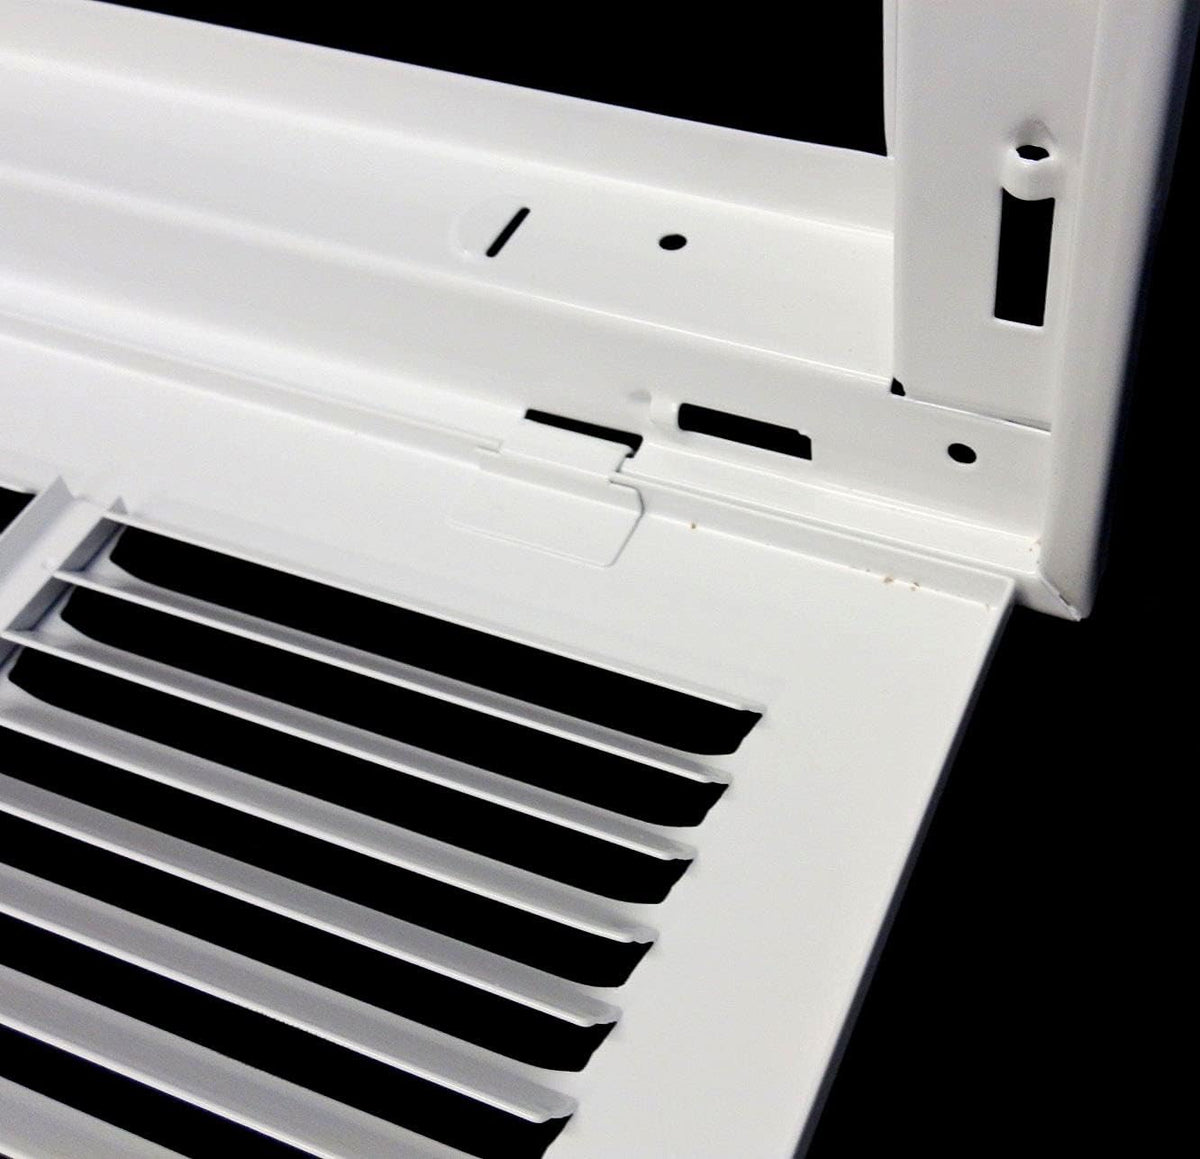 8&quot; X 30&quot; Steel Return Air Filter Grille for 1&quot; Filter - Removable Frame - [Outer Dimensions: 10 5/8&quot; X 32 5/8&quot;]